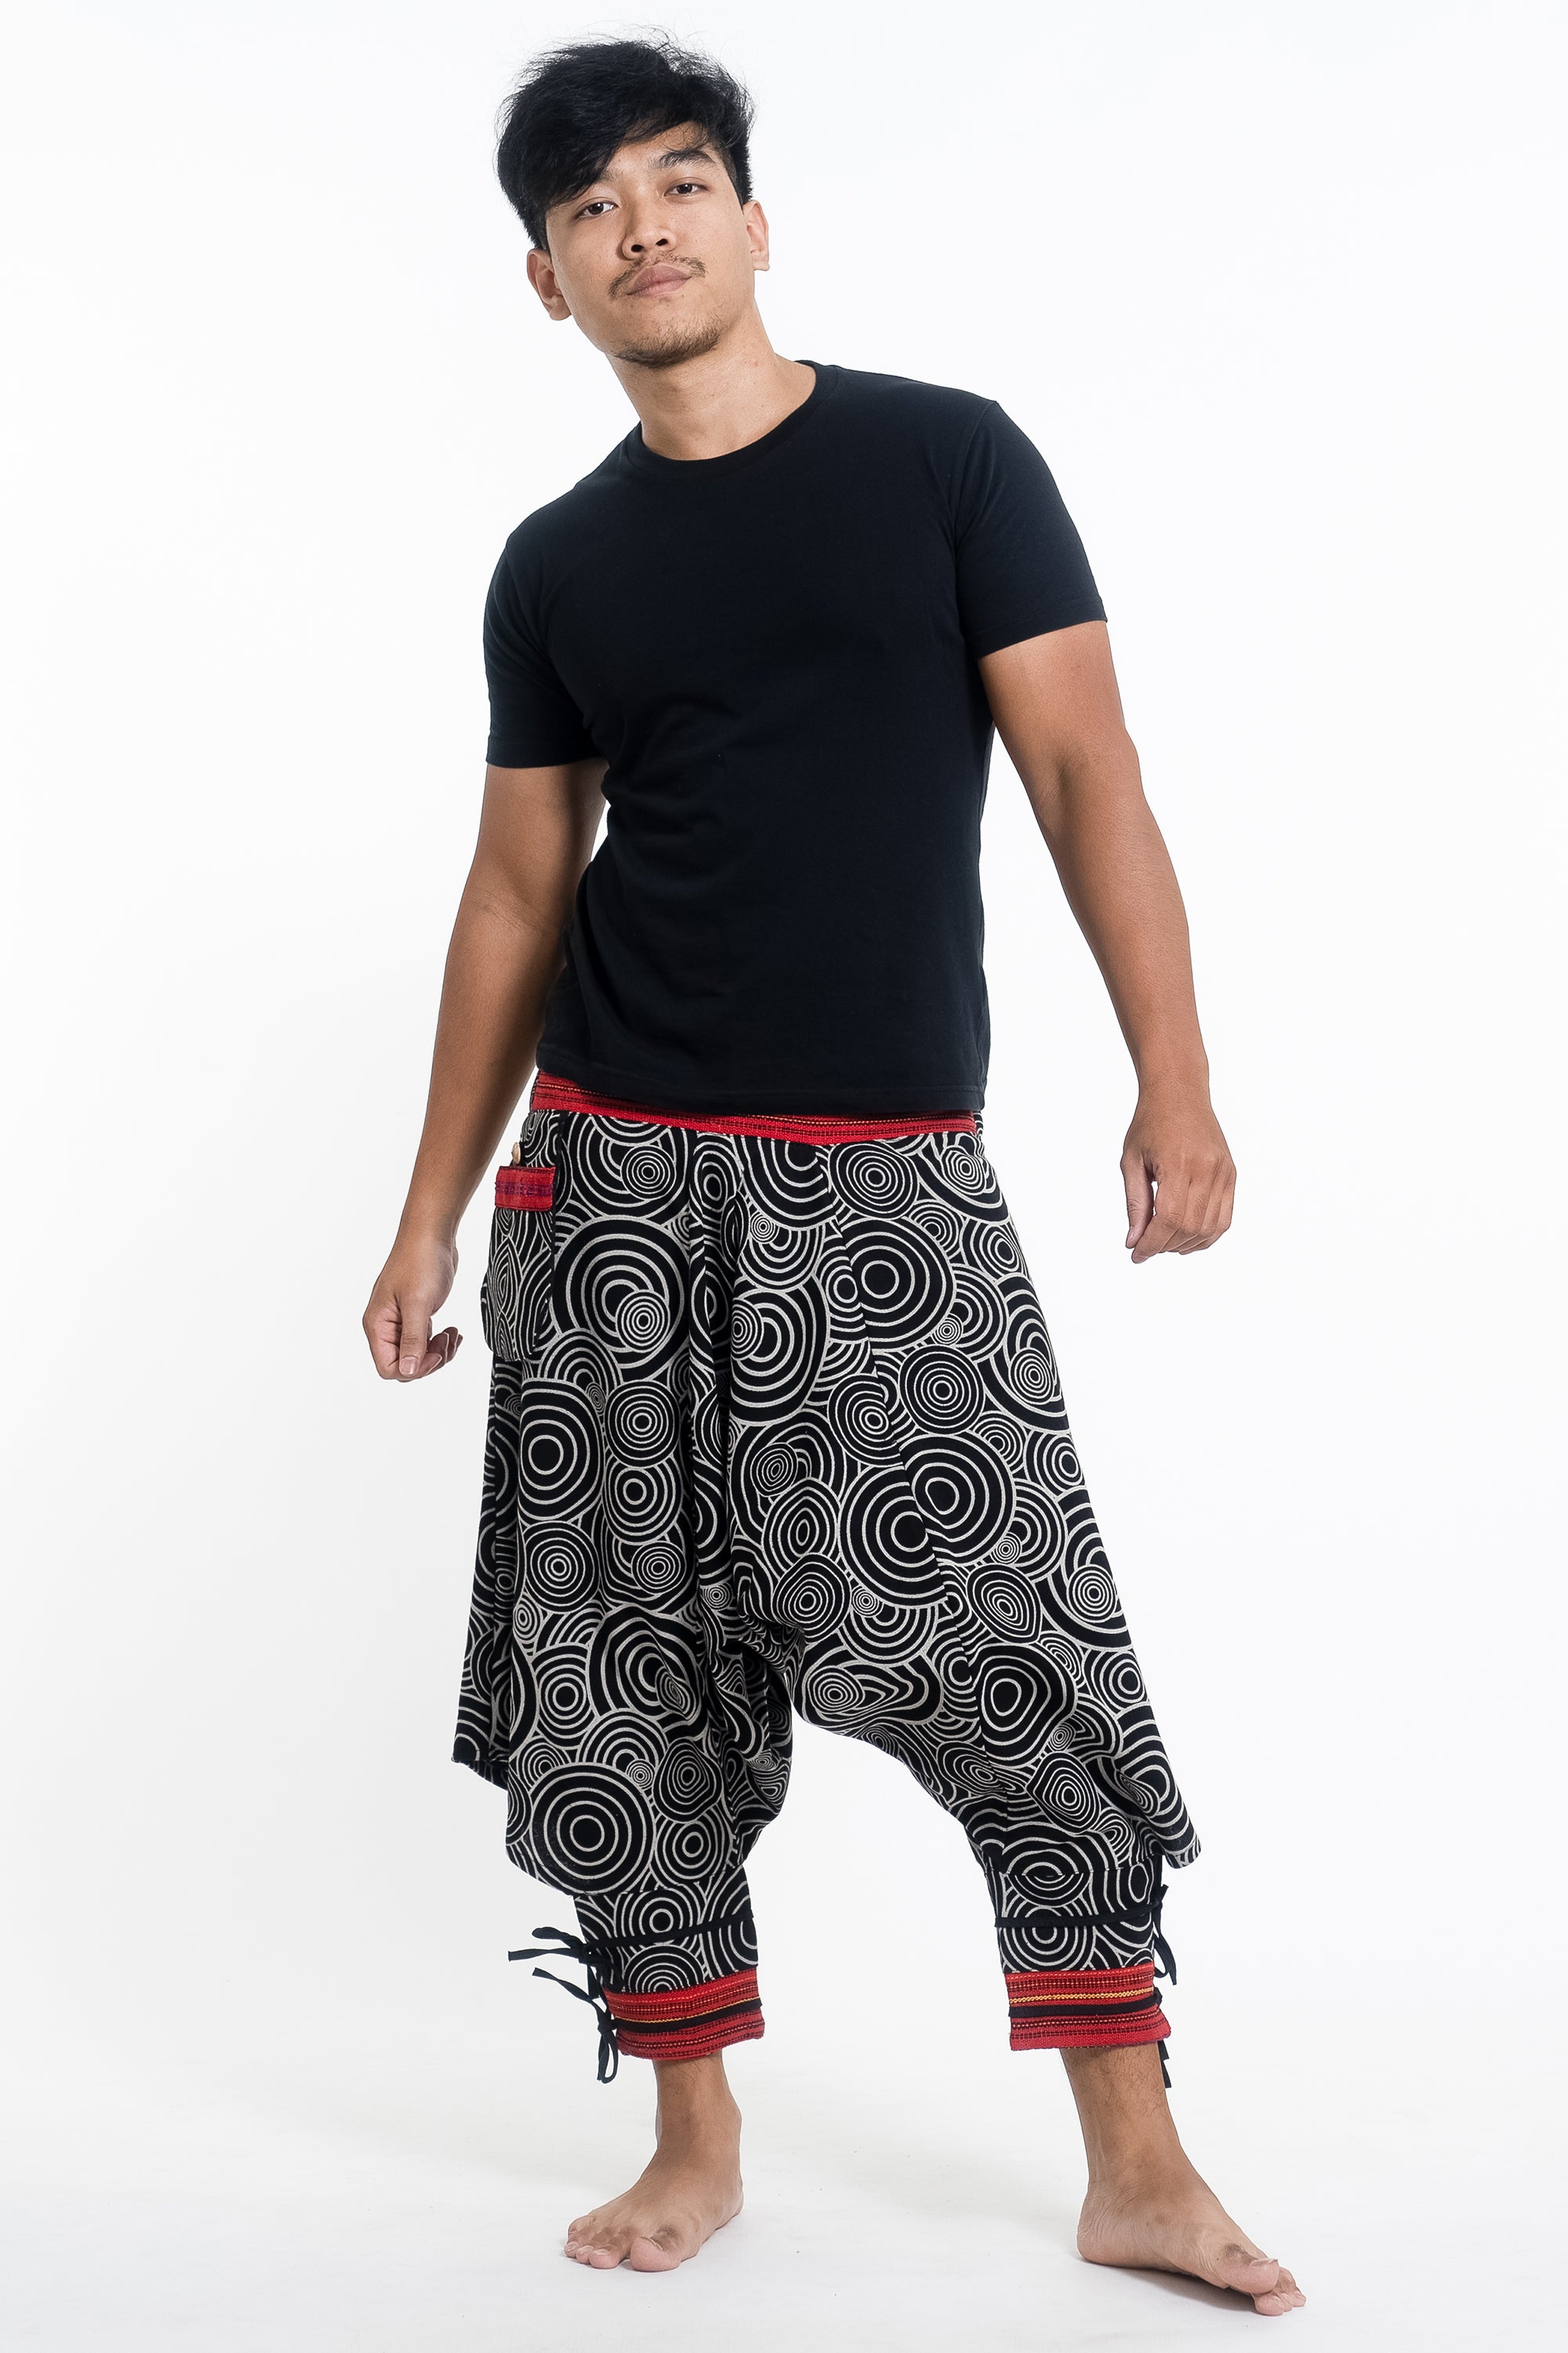 Swirls Prints Thai Hill Tribe Fabric Men's Harem Pants with Ankle Stra